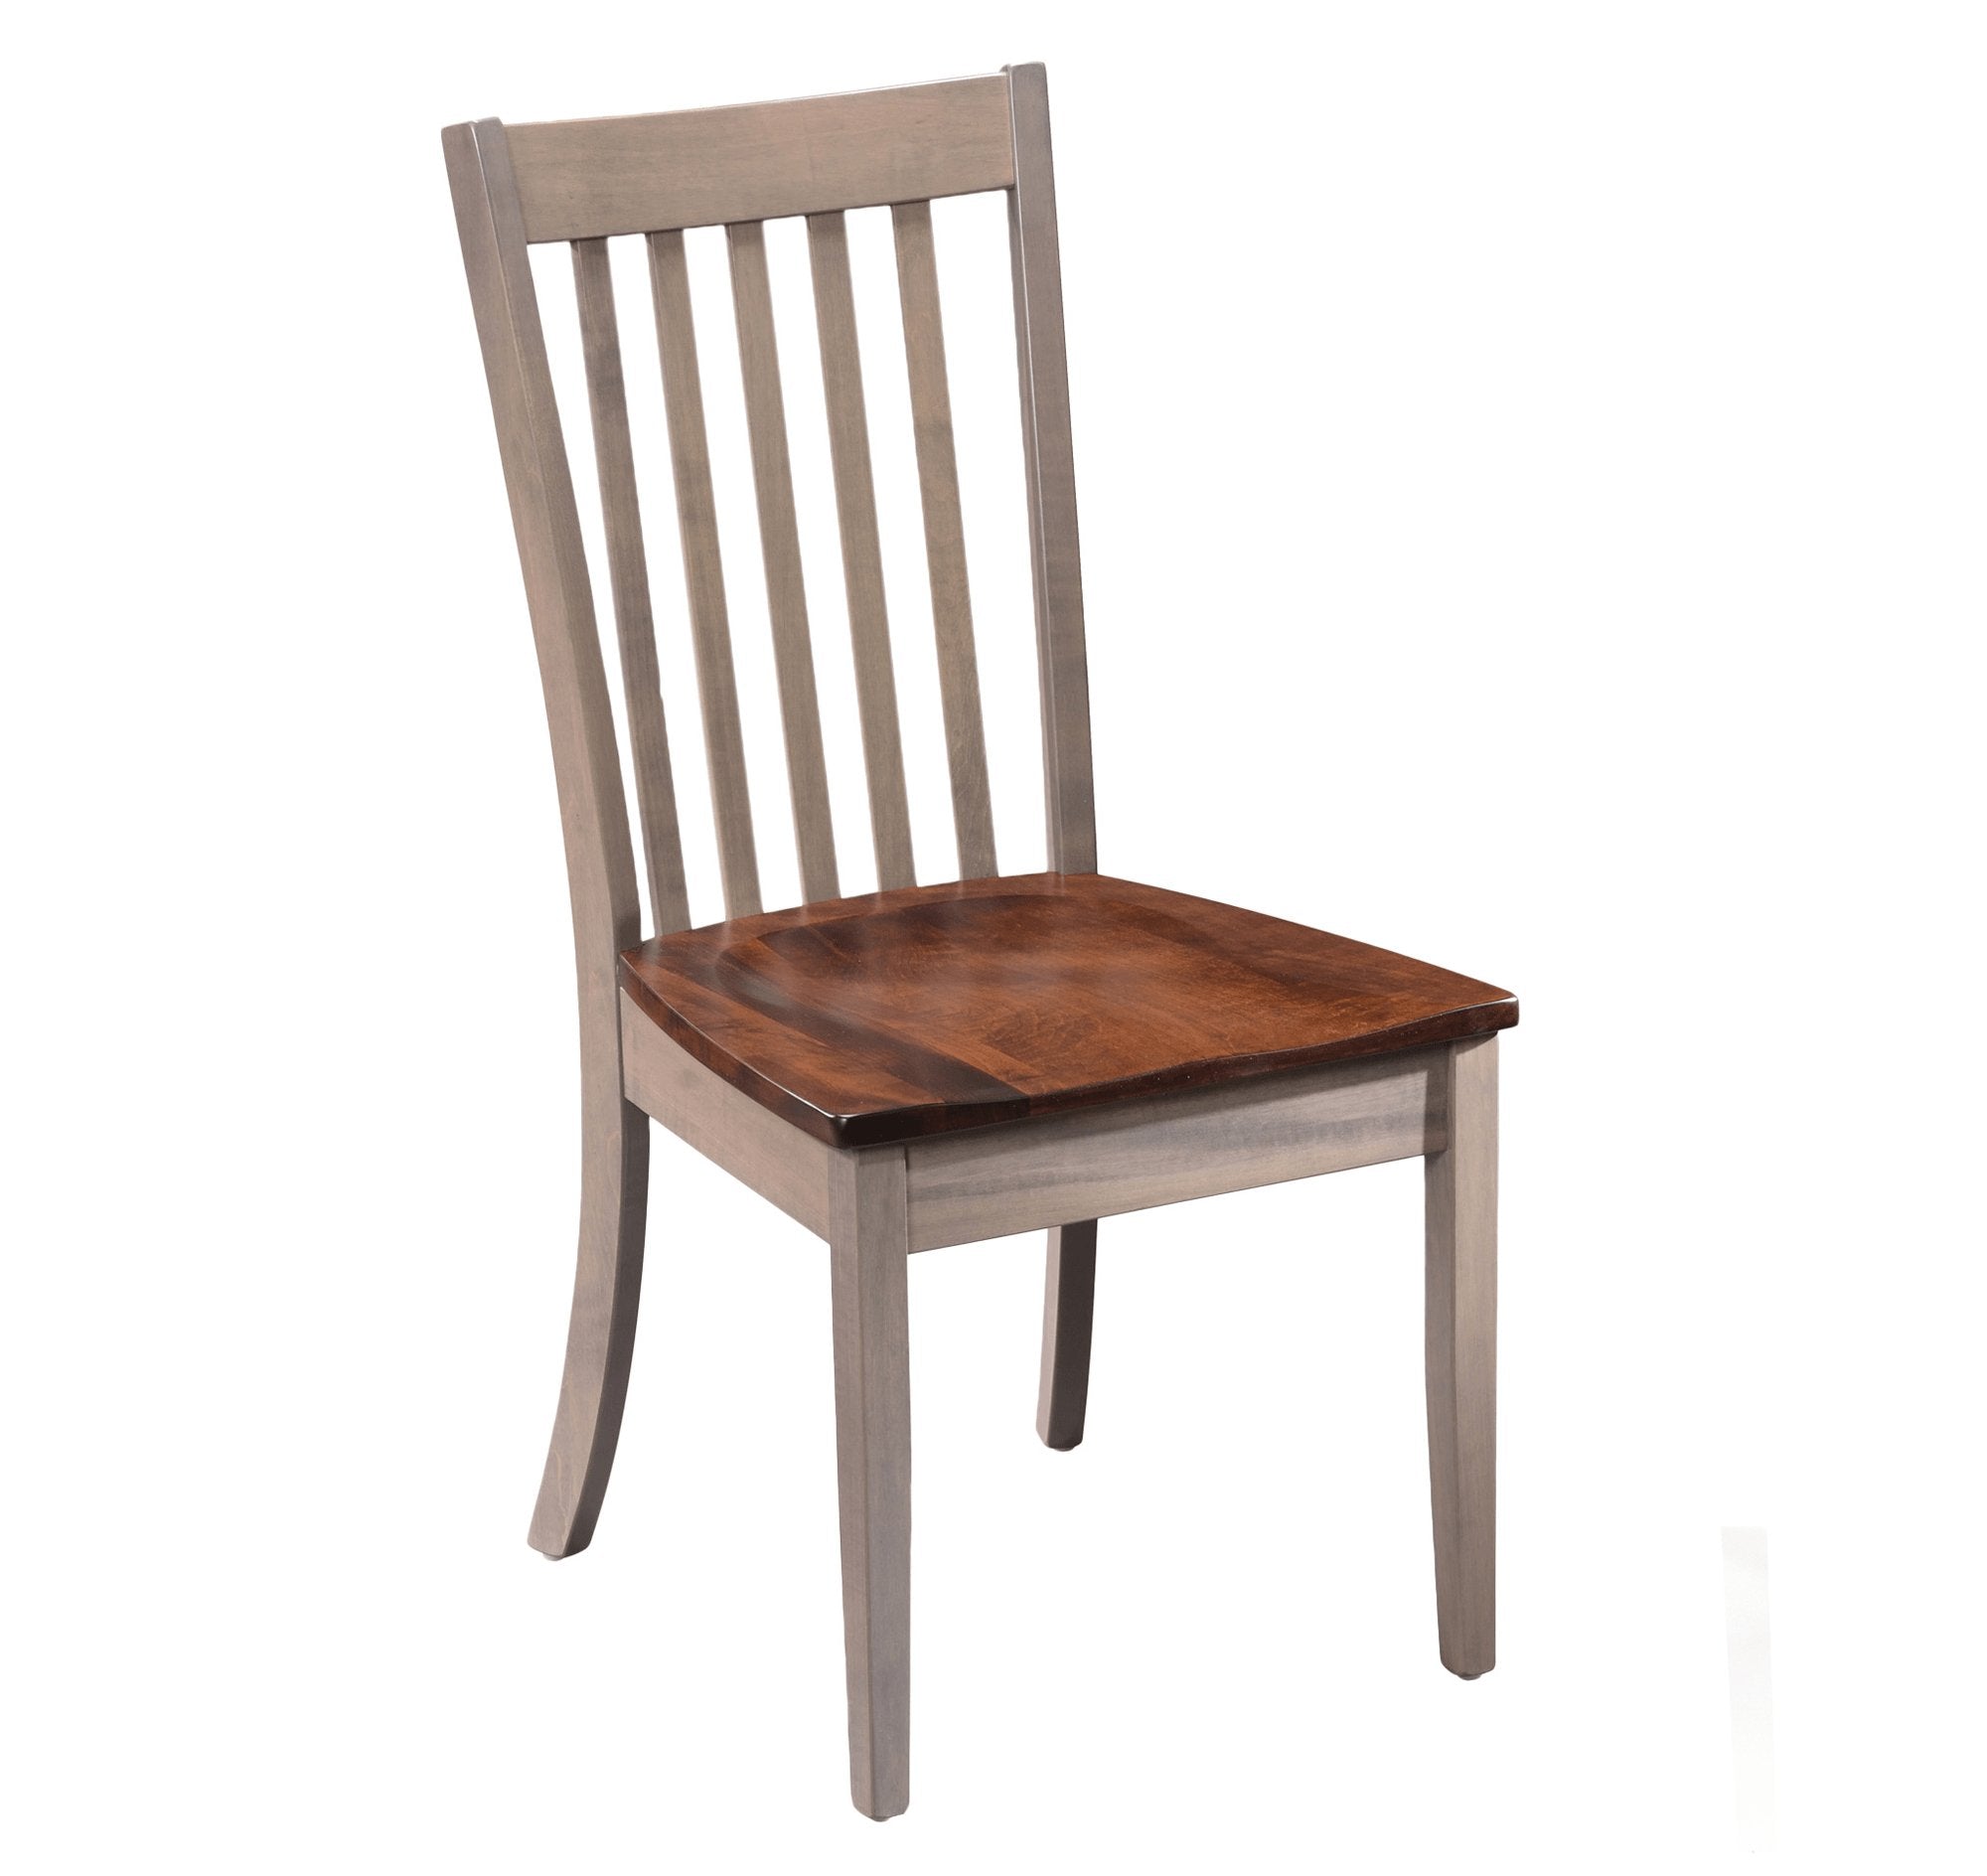 Alex Dining Chair - Baconco